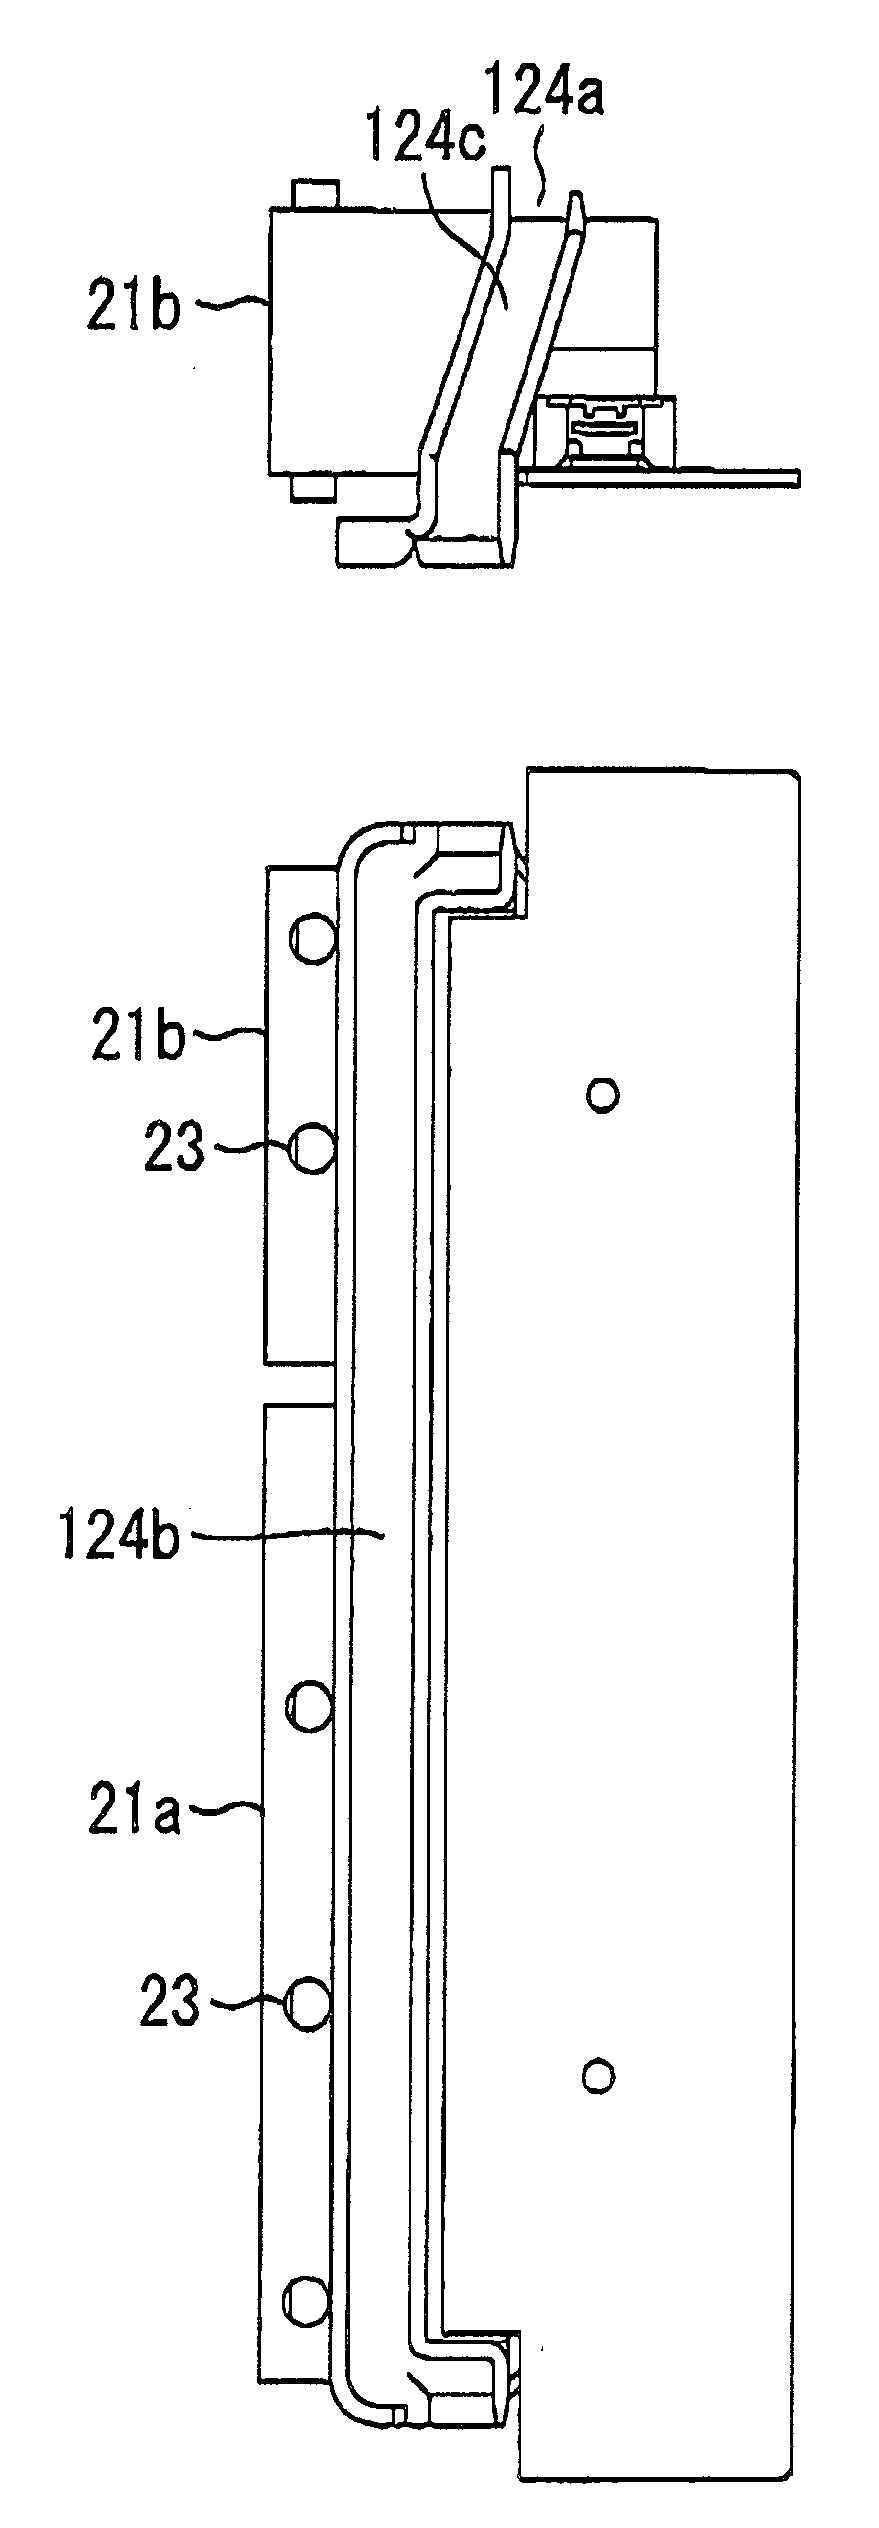 Electronic control unit casing and electrical connector